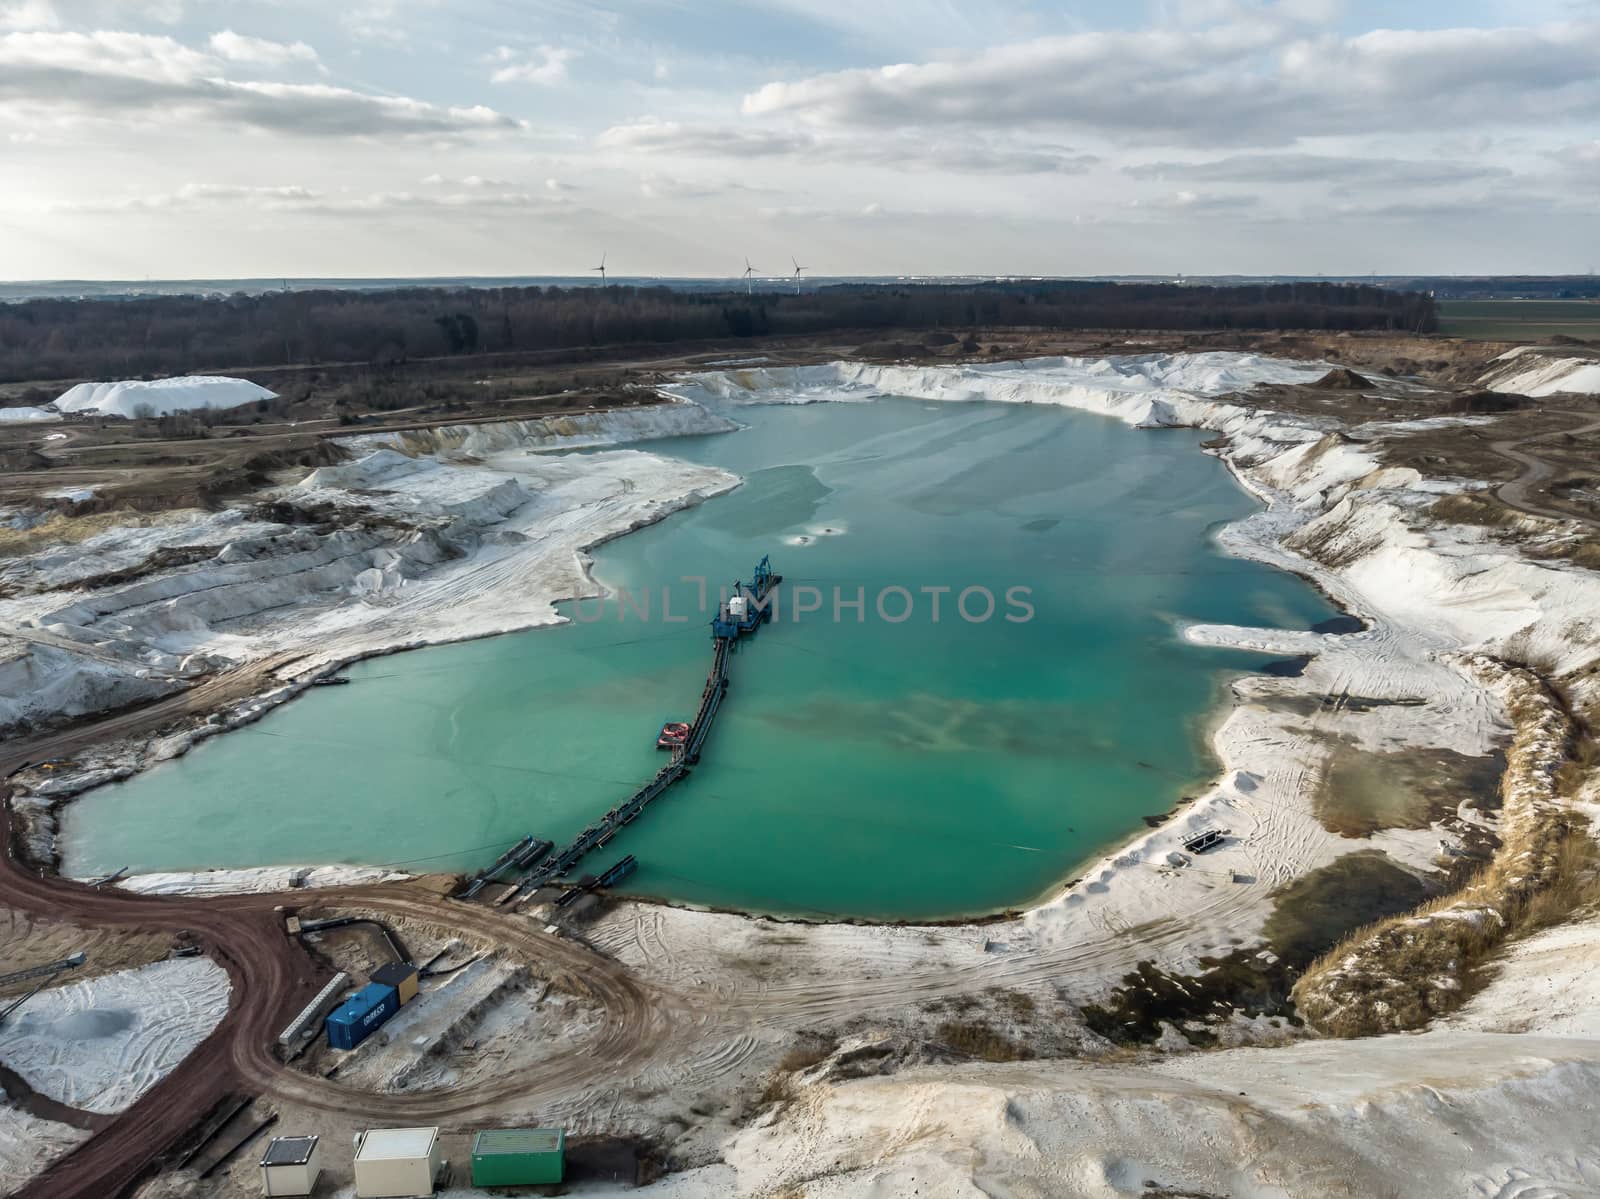 Aerial photo of one of the quartz quartz quartz quarry mining ponds with a suction dredger in the foreground and a dramatic sky. Made with drone